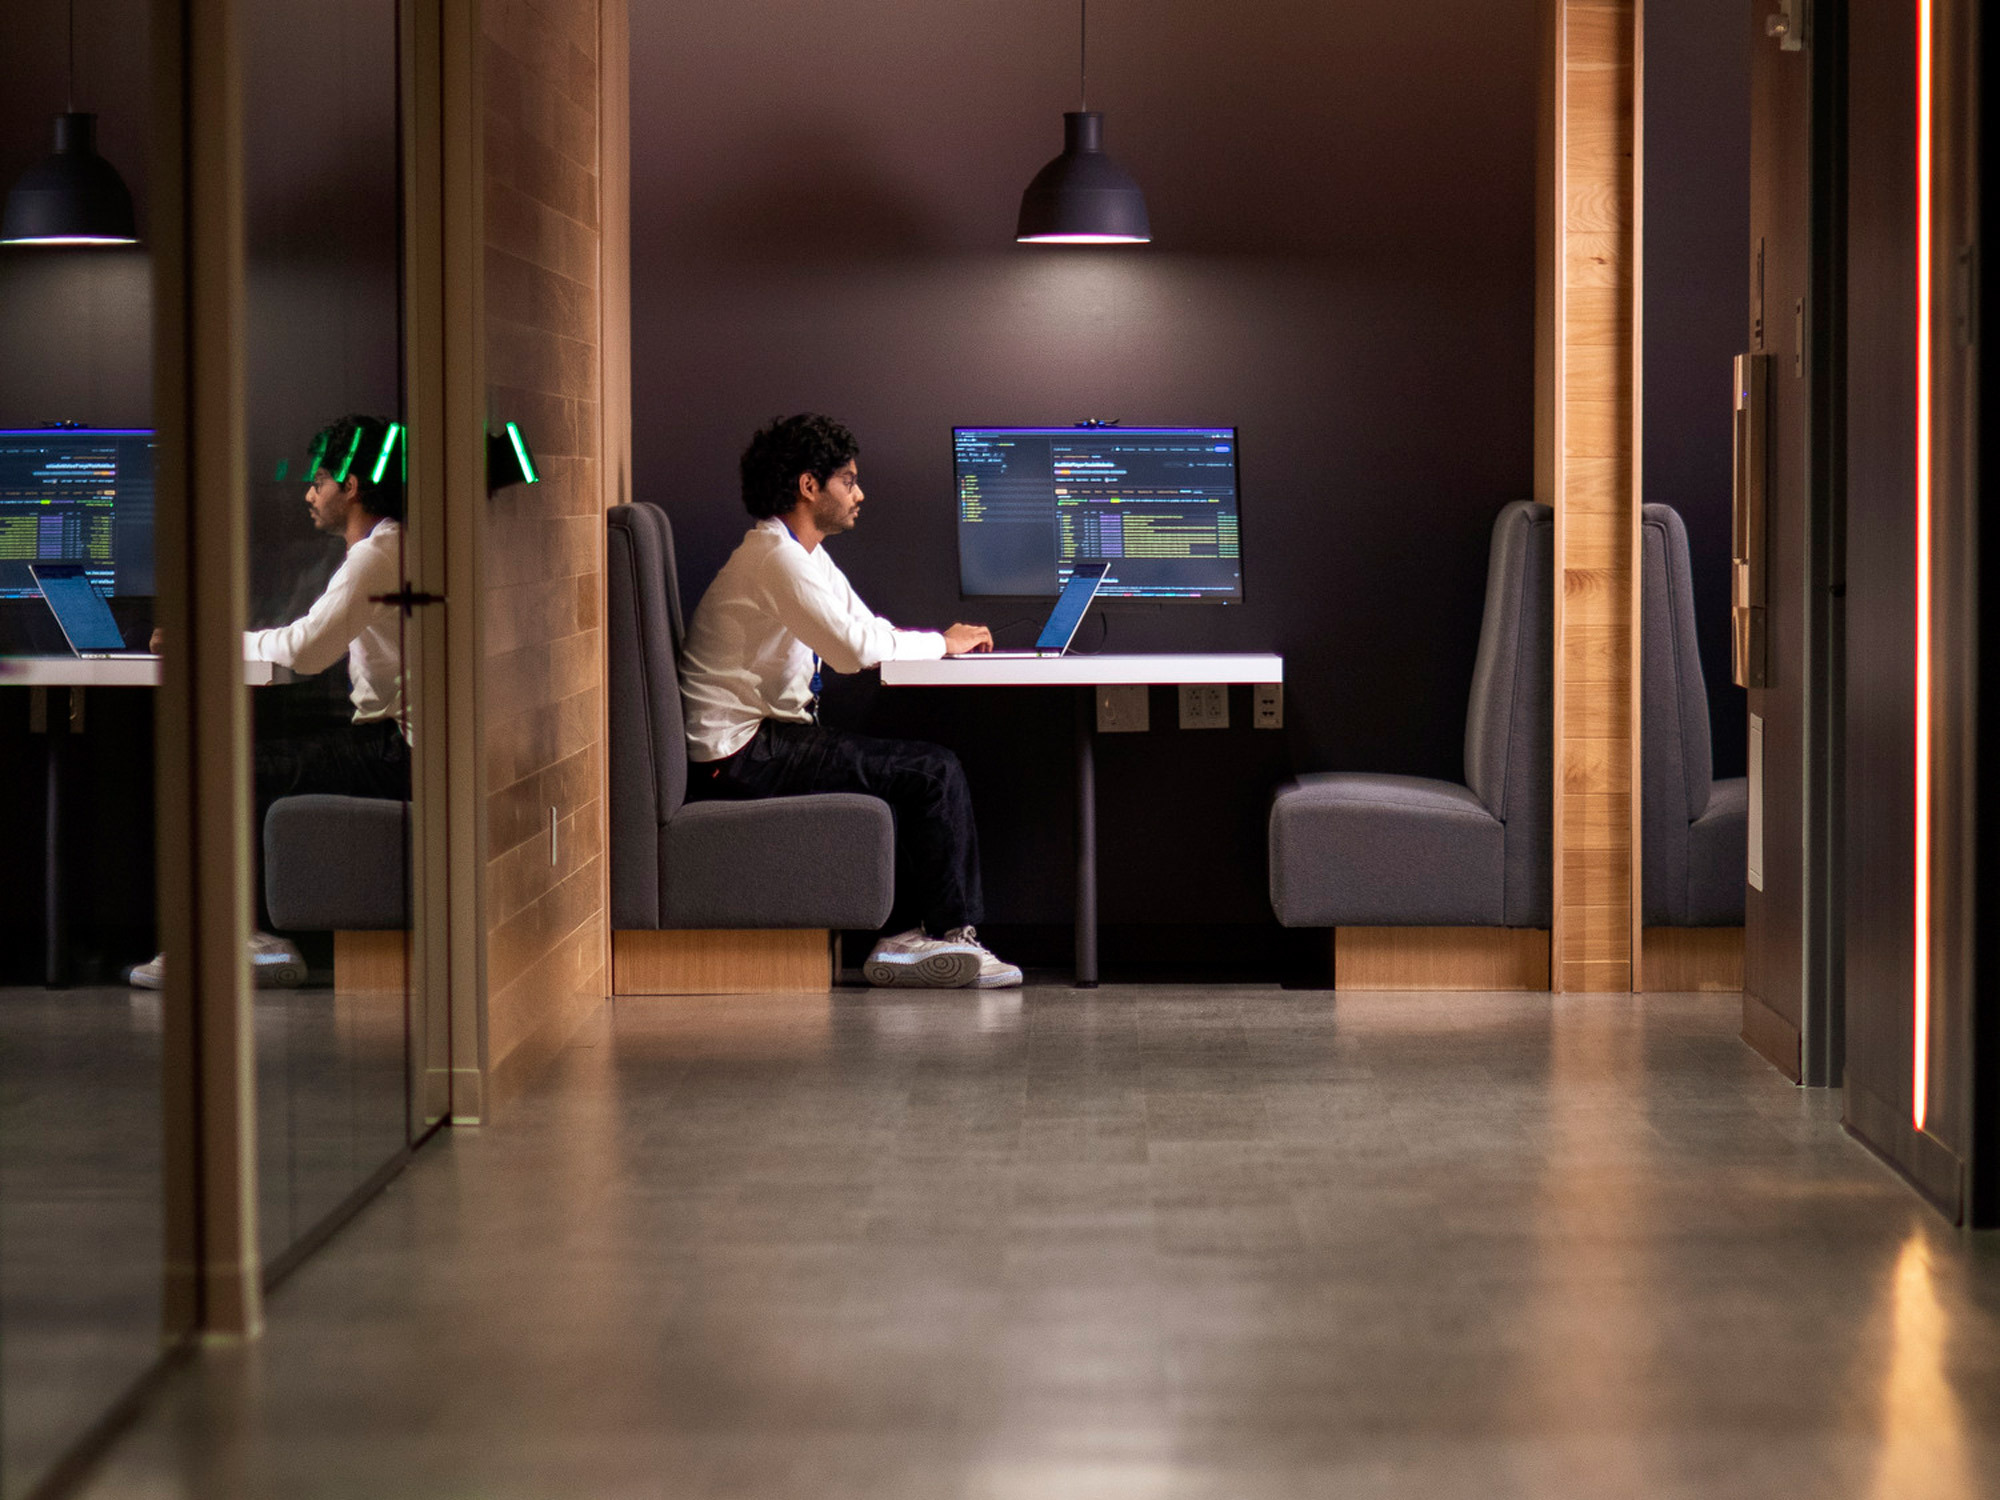 A dimly lit focus area in an office setting with high-backed booths providing privacy for individuals working on computers, creating an ambiance of concentrated productivity.